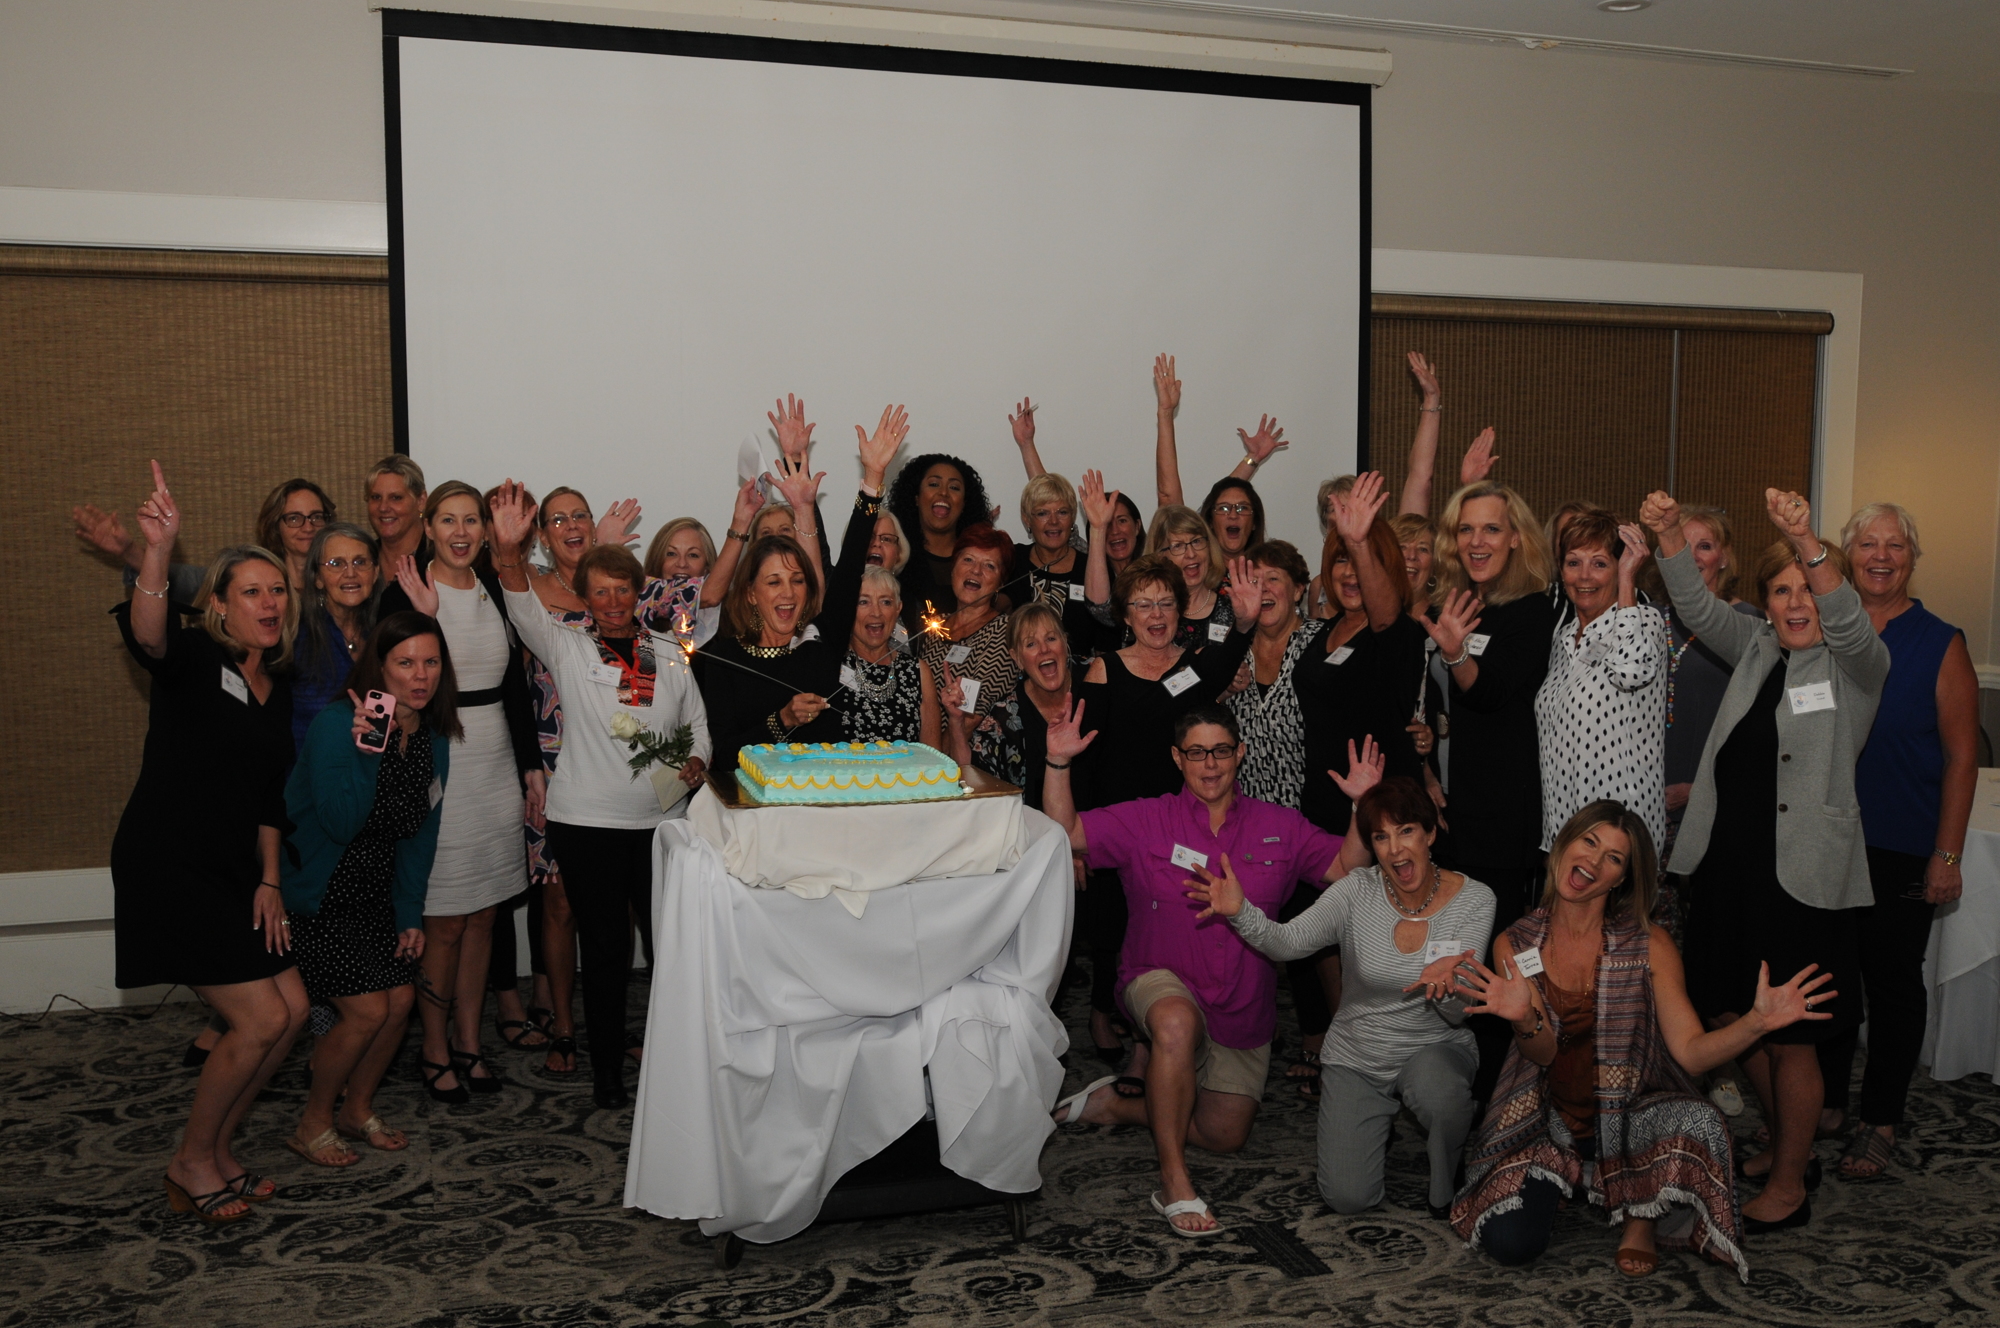 Women Who Care, a new organization, raised $44,100 for non-profits the past year. Courtesy photo